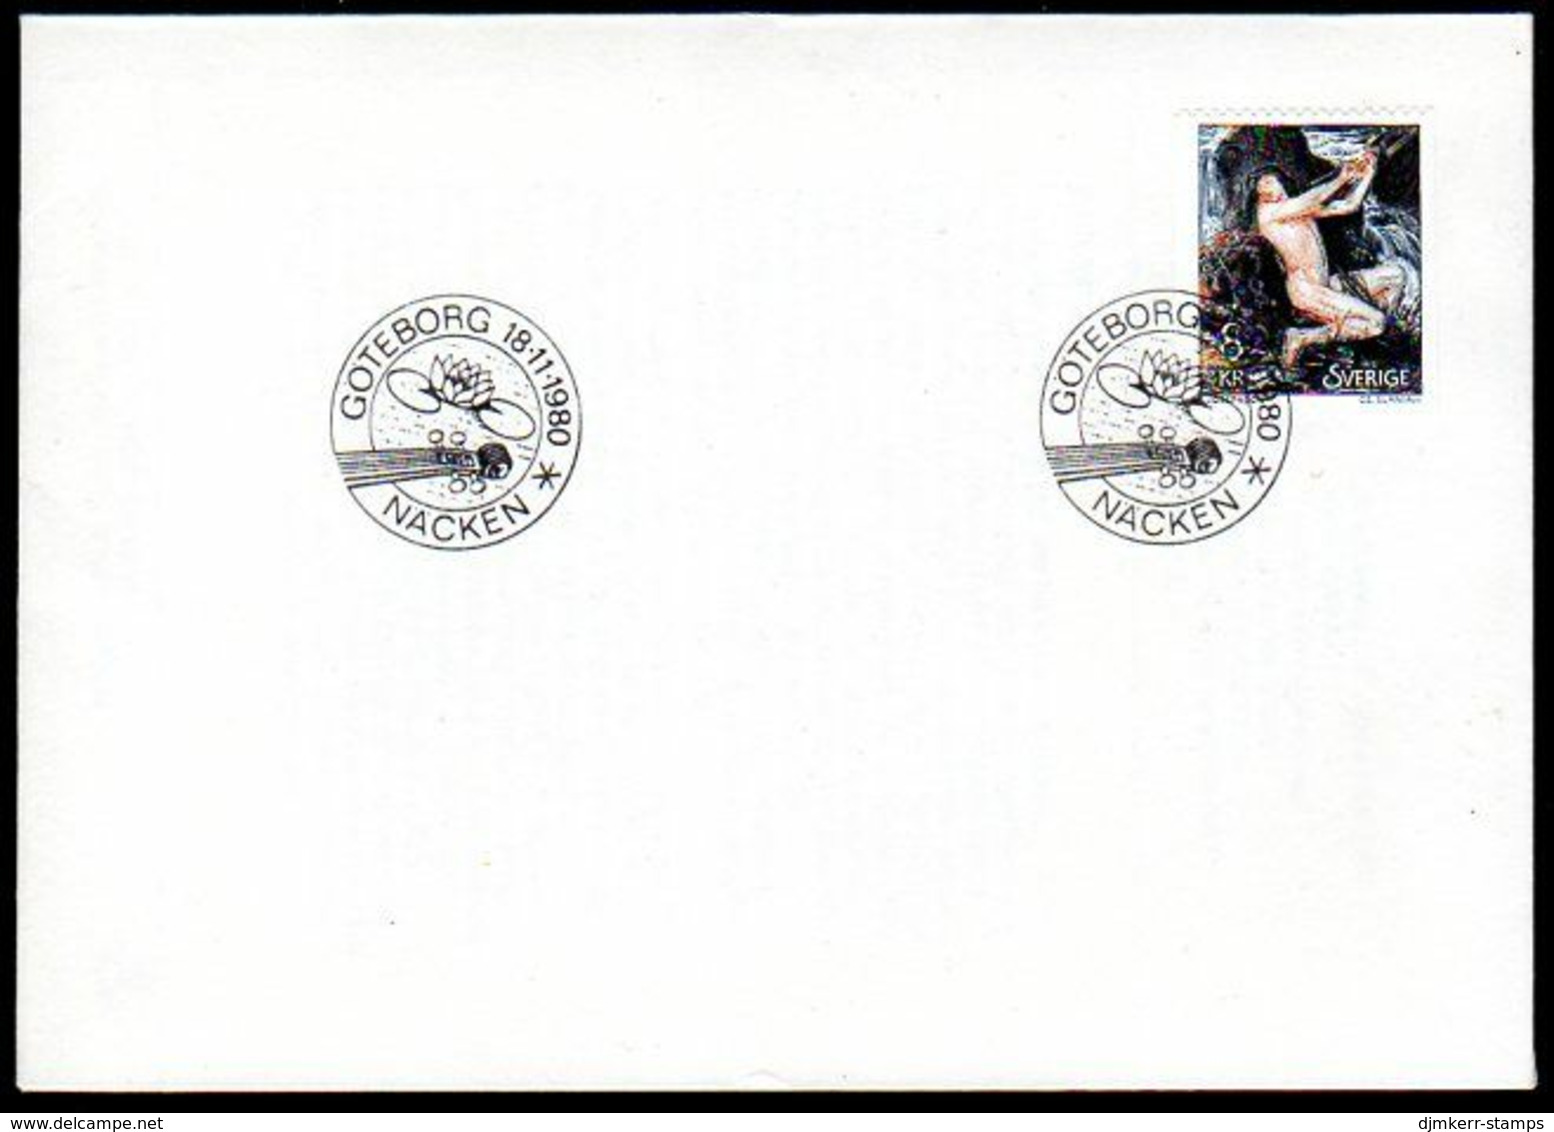 SWEDEN 1980 Josephsson Painting FDC. Michel 1128 - FDC